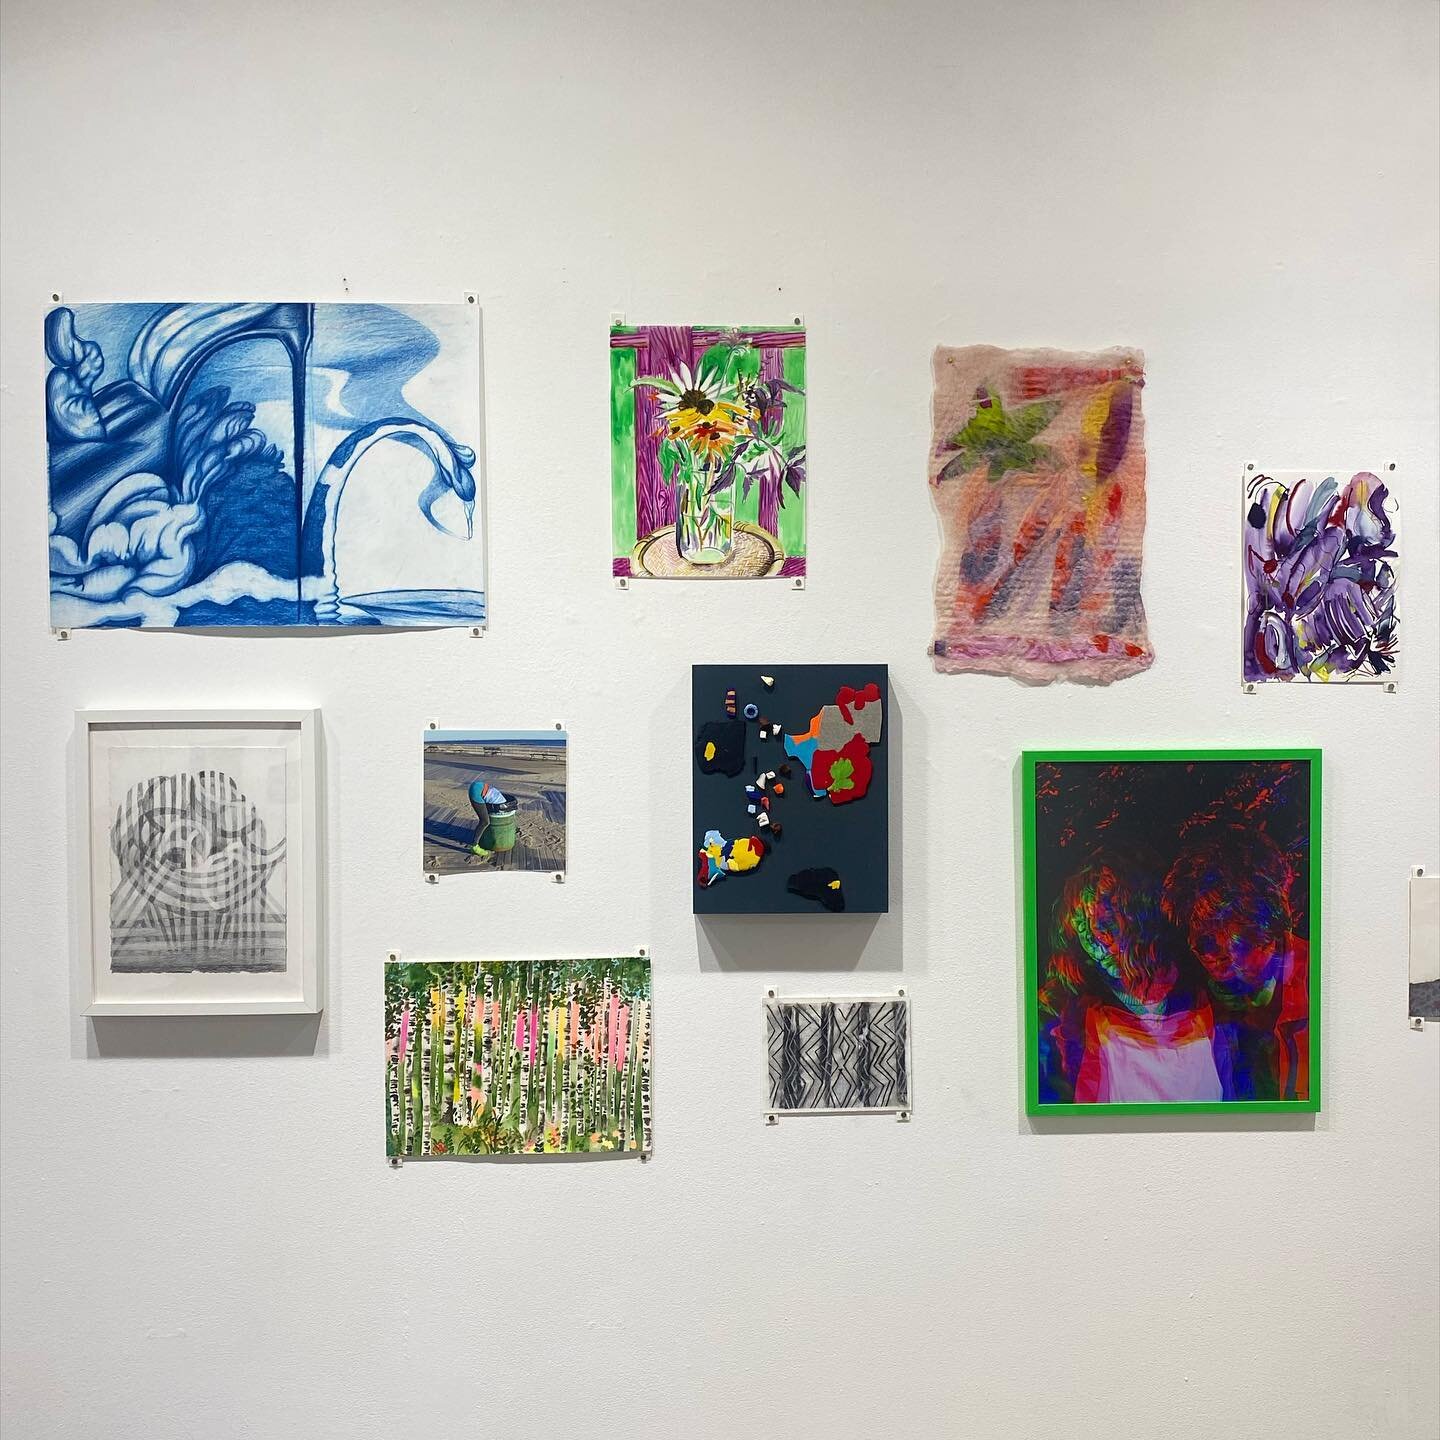 THIS SATURDAY &amp; SUNDAY, The gallery will be open for an exhibition preview of works donated to our 10-year anniversary fundraiser! Stop by between 1-6pm to see all the incredible works!

💕 OYG PROJECTS&rsquo; 10 YEAR ANNIVERSARY FUNDRAISER EVENT